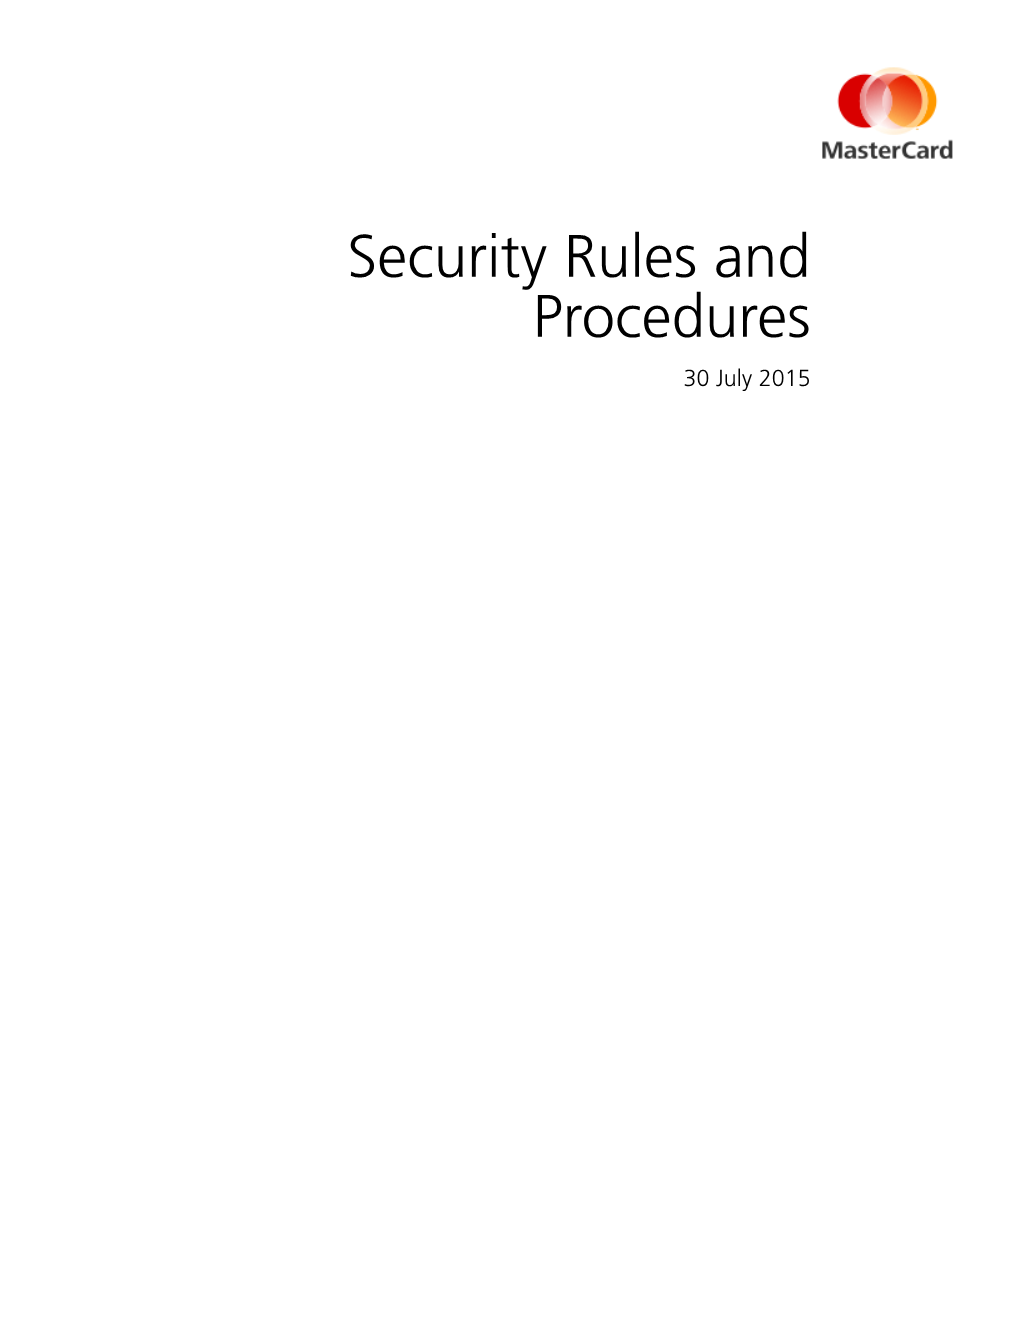 Security Rules and Procedures 30 July 2015 Summary of Changes, 30 July 2015